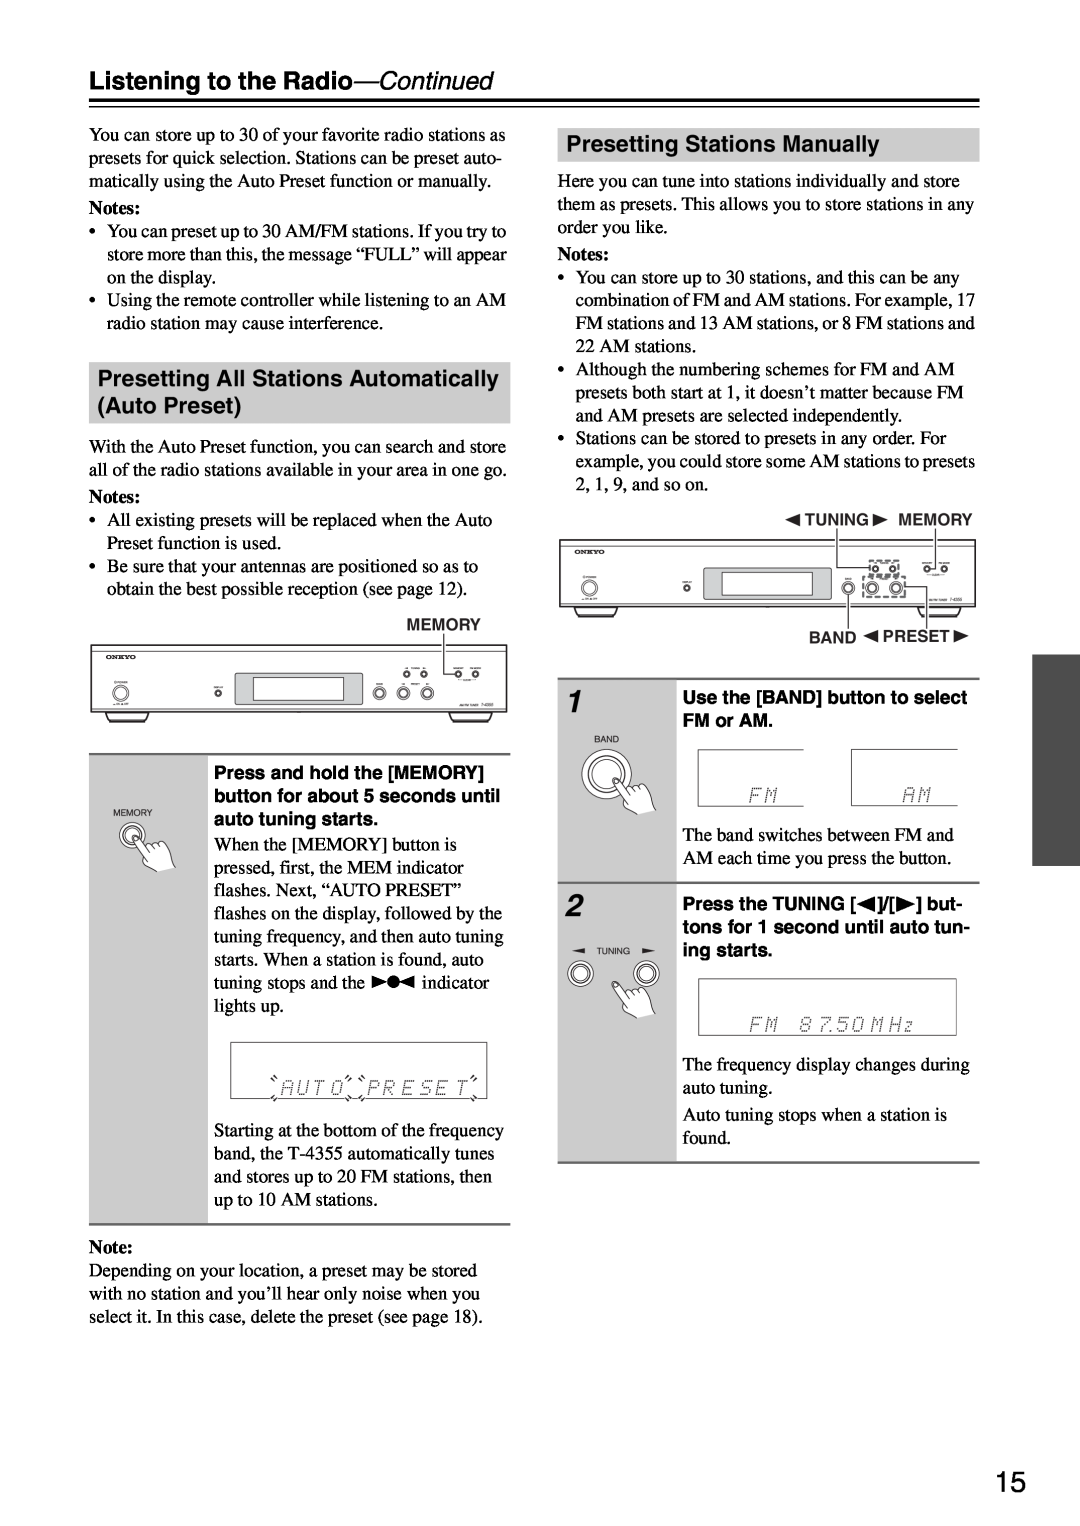 Onkyo T-4355 instruction manual Listening to the Radio-Continued, Presetting All Stations Automatically Auto Preset 